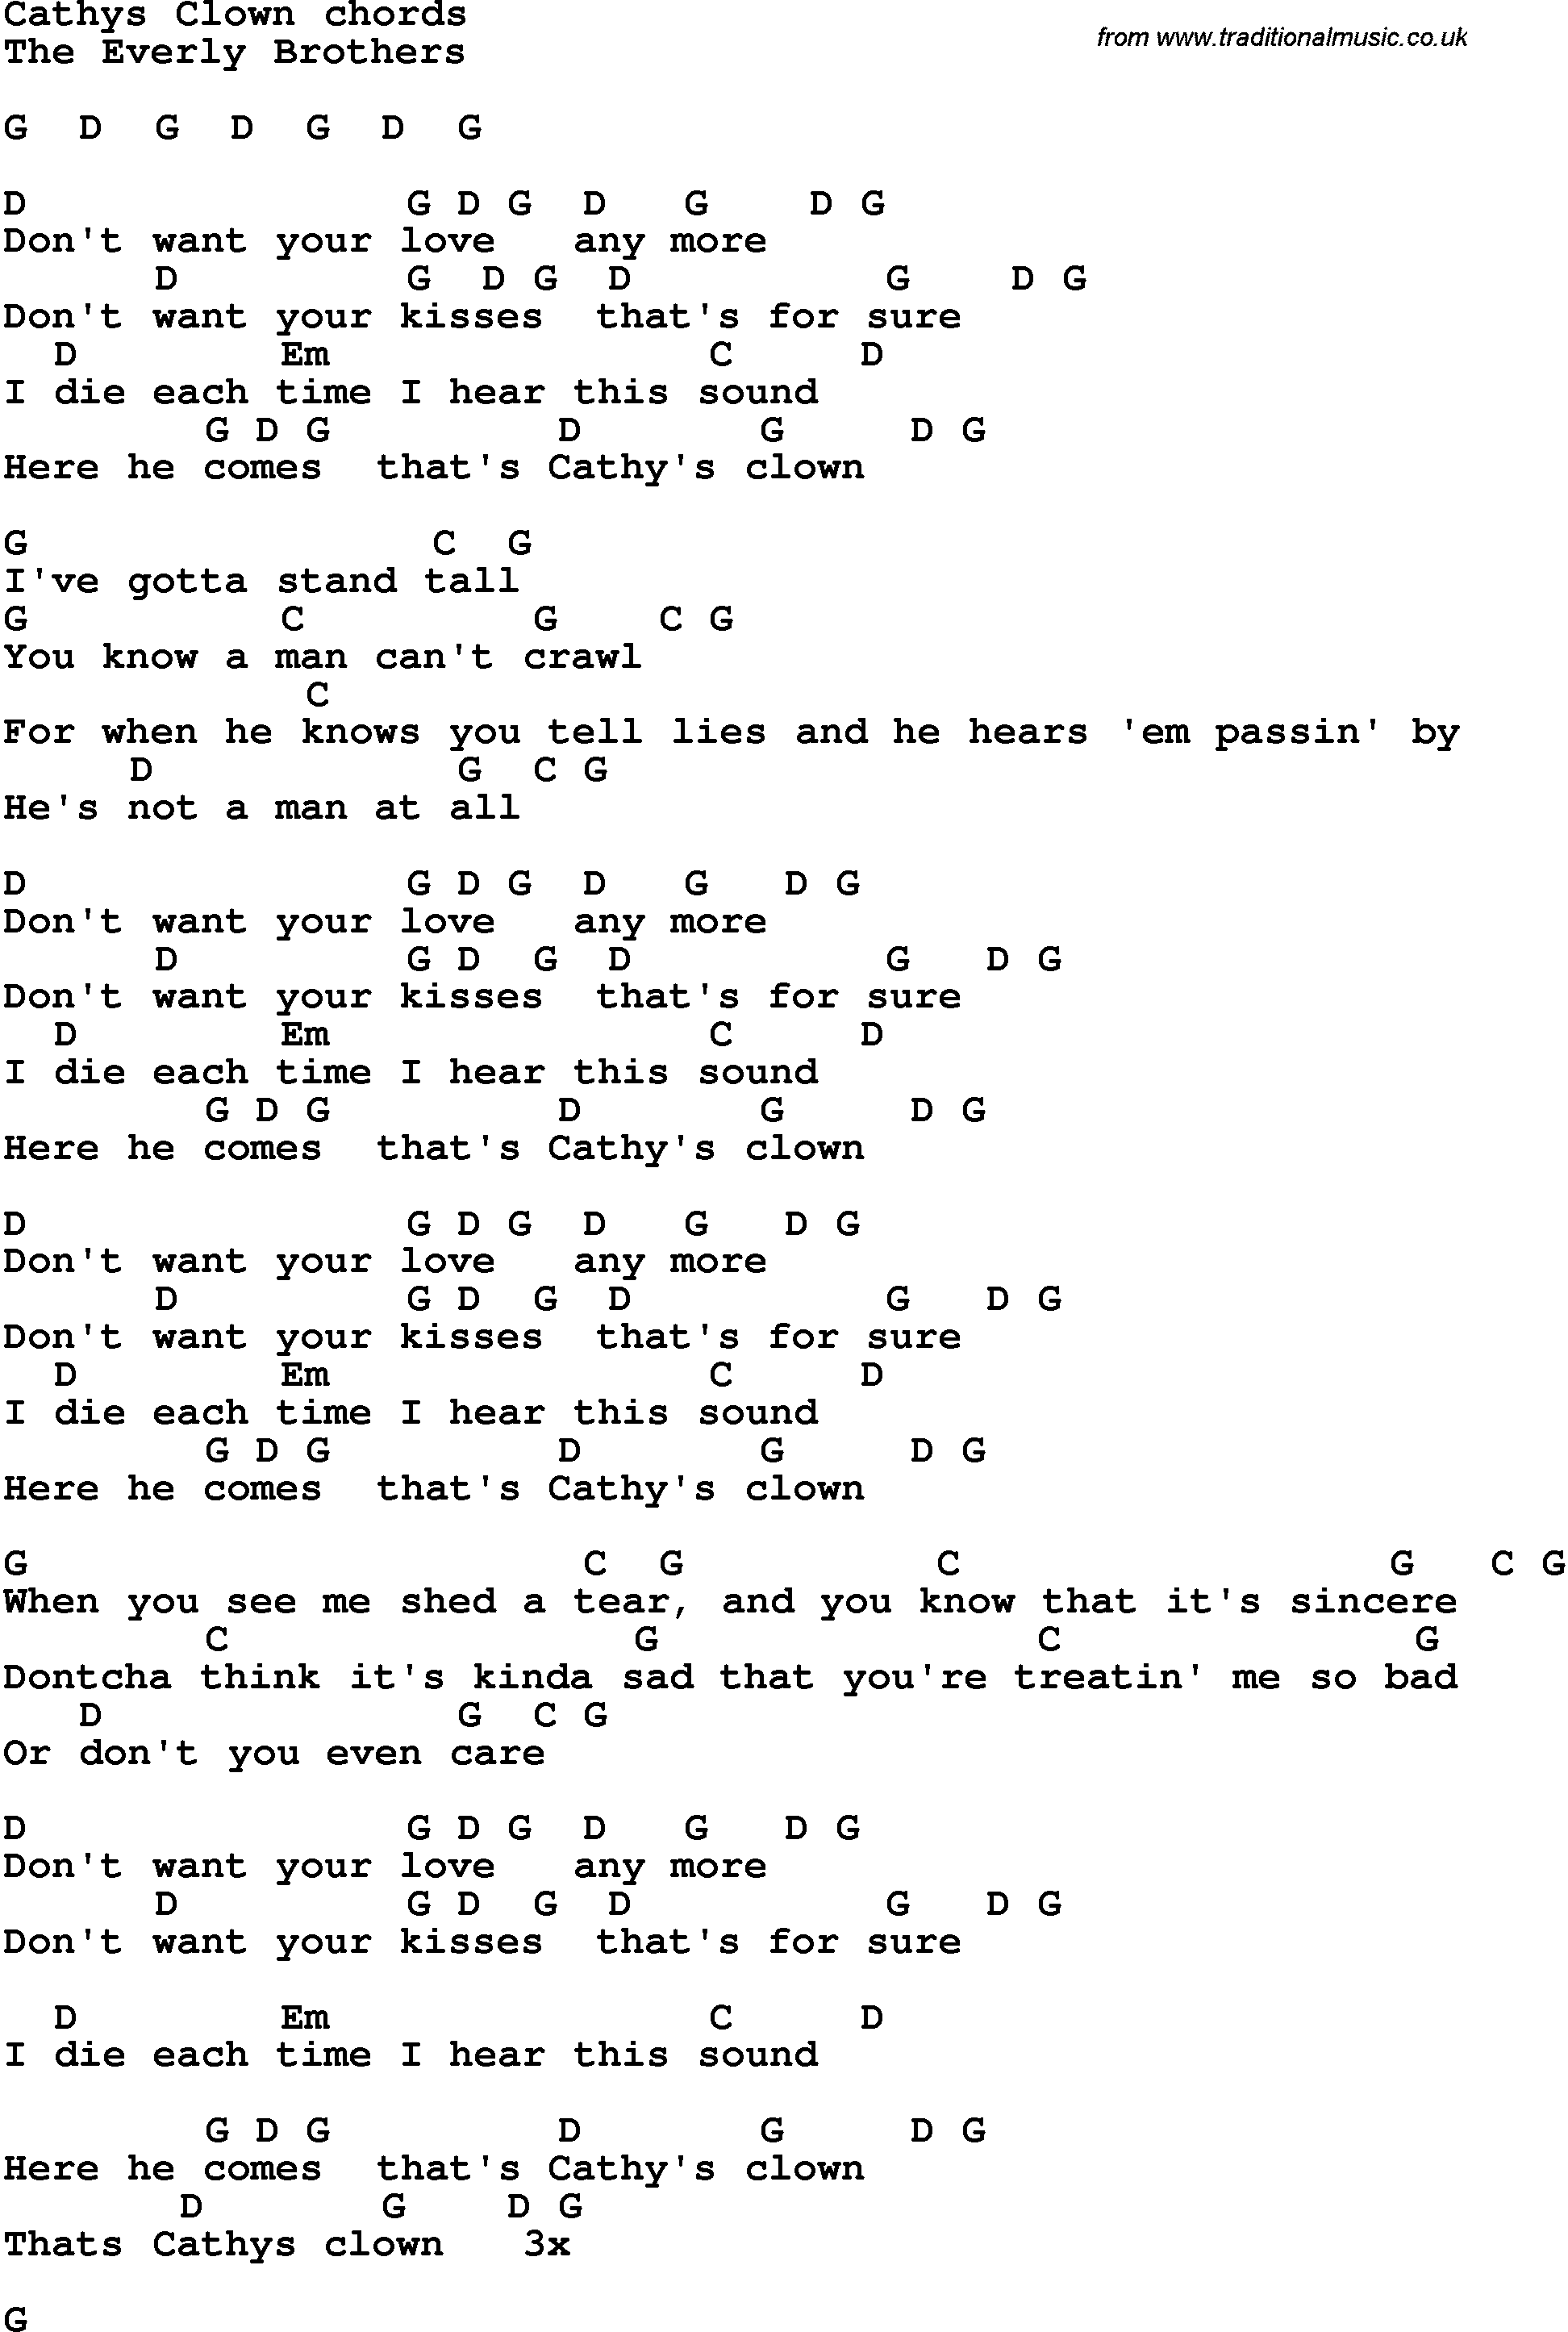 Song Lyrics with guitar chords for Cathy's Clown